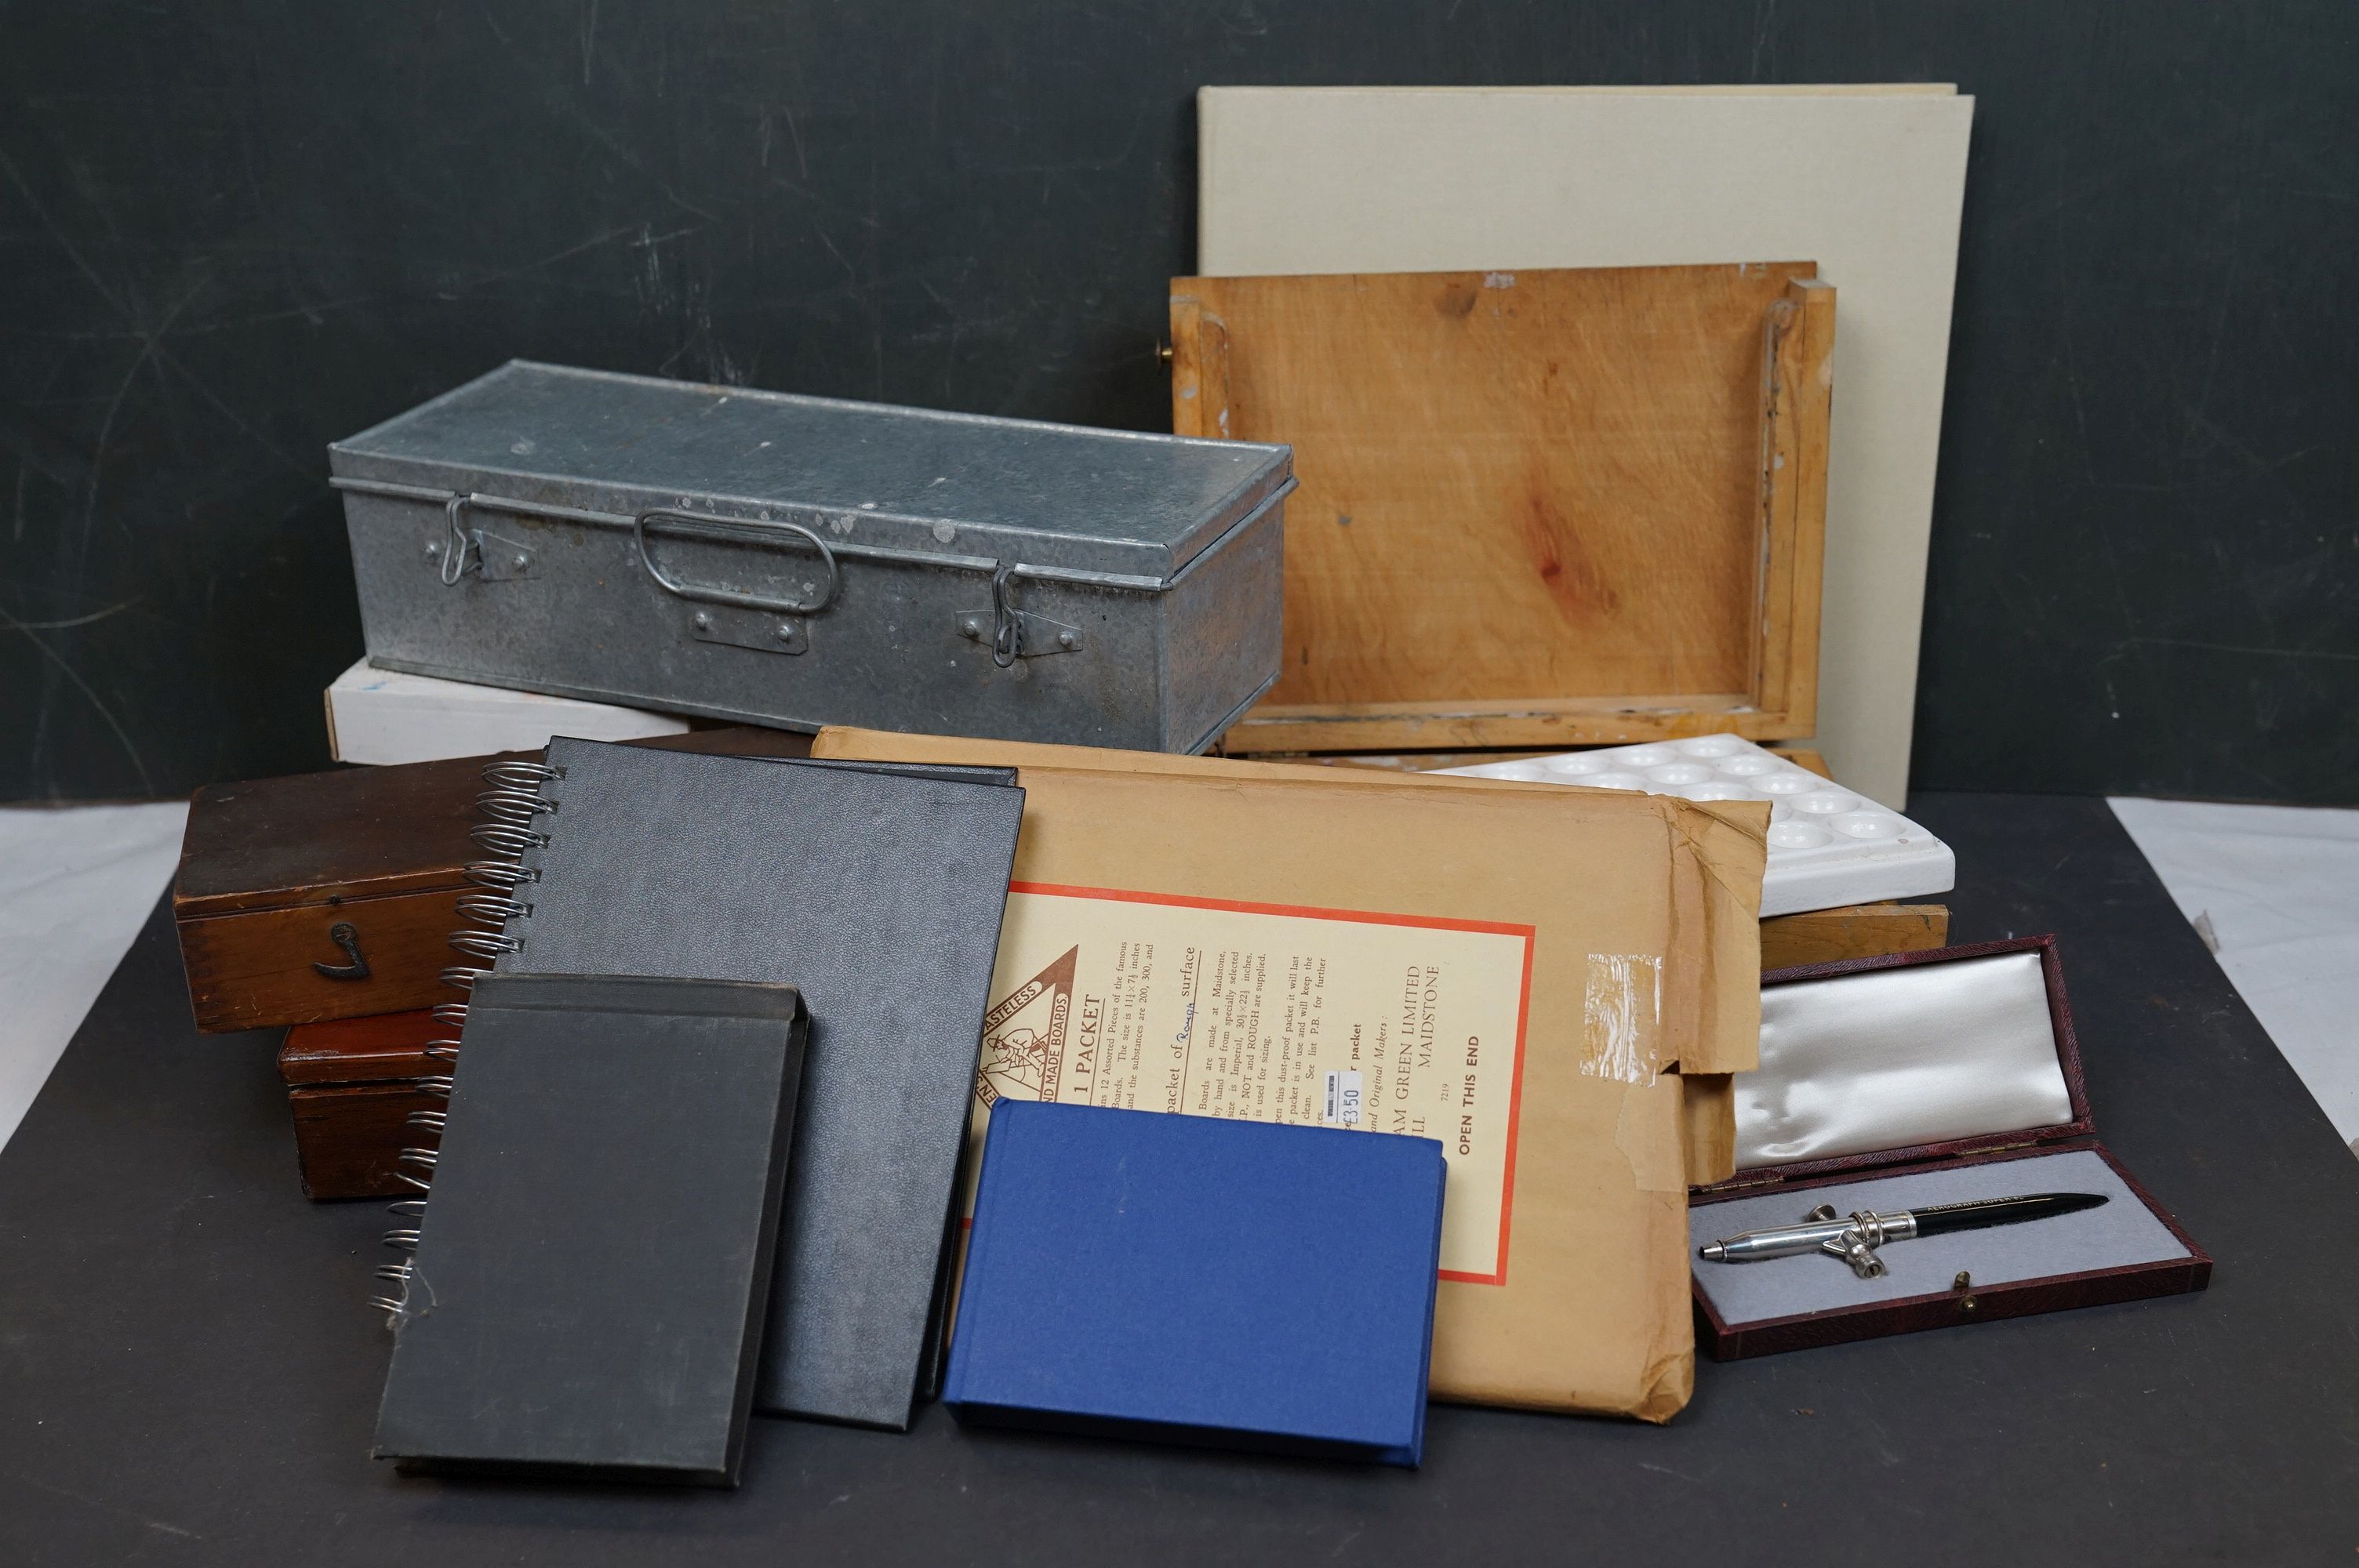 A collection of vintage art supplies and drawing equipment within wooden boxes.